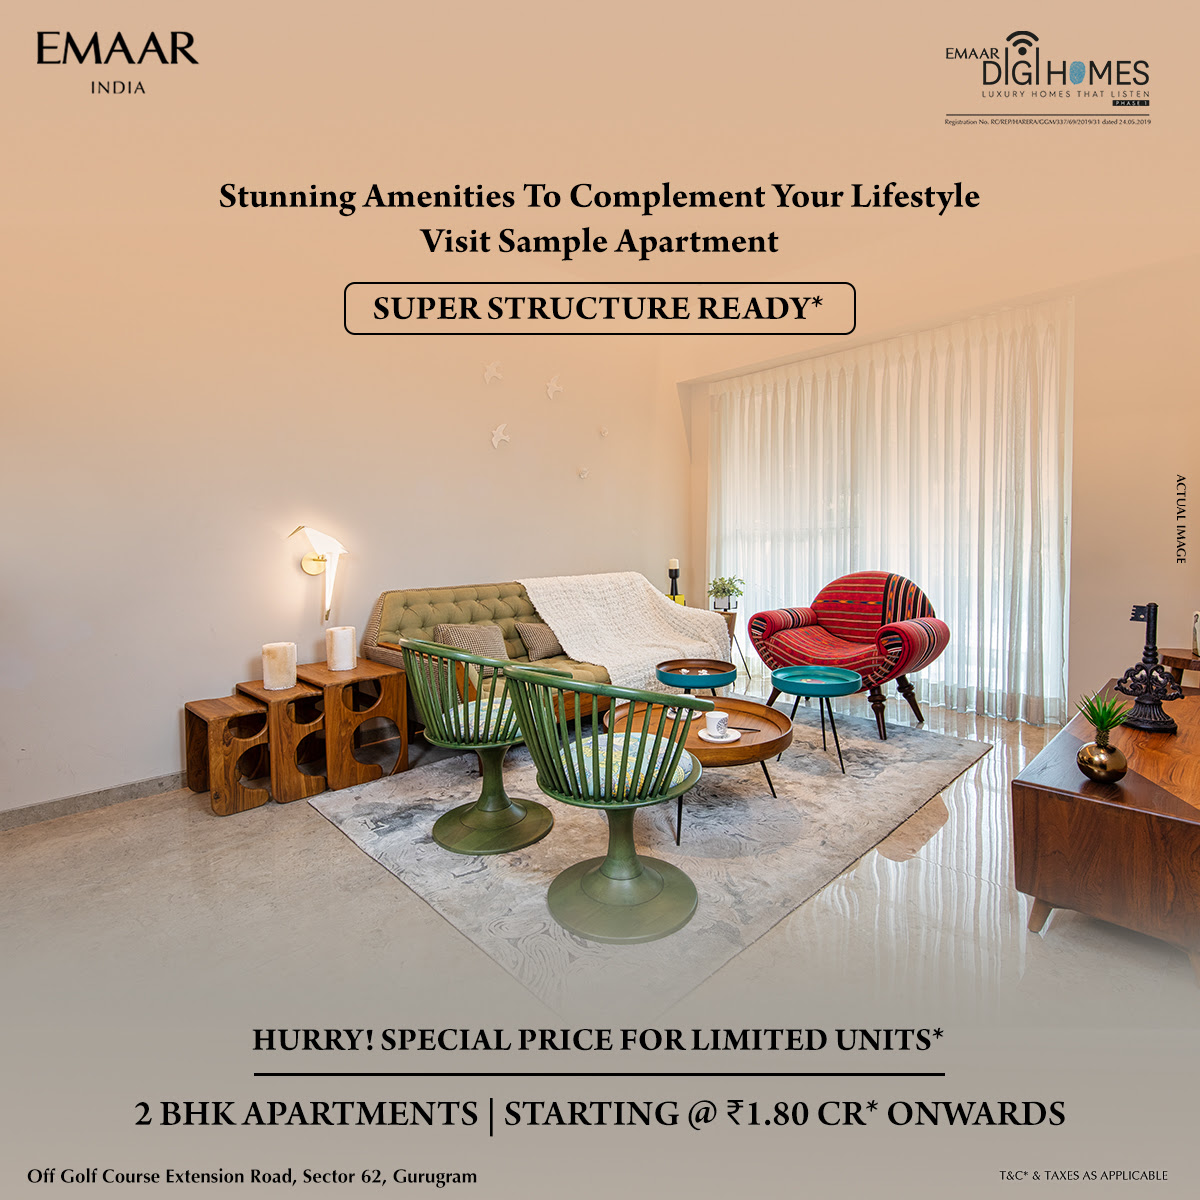 Hurry special price for limited units 2 BHK apartments Rs 1.80 Cr at  Emaar Digi Homes in Sector 62, Gurgaon